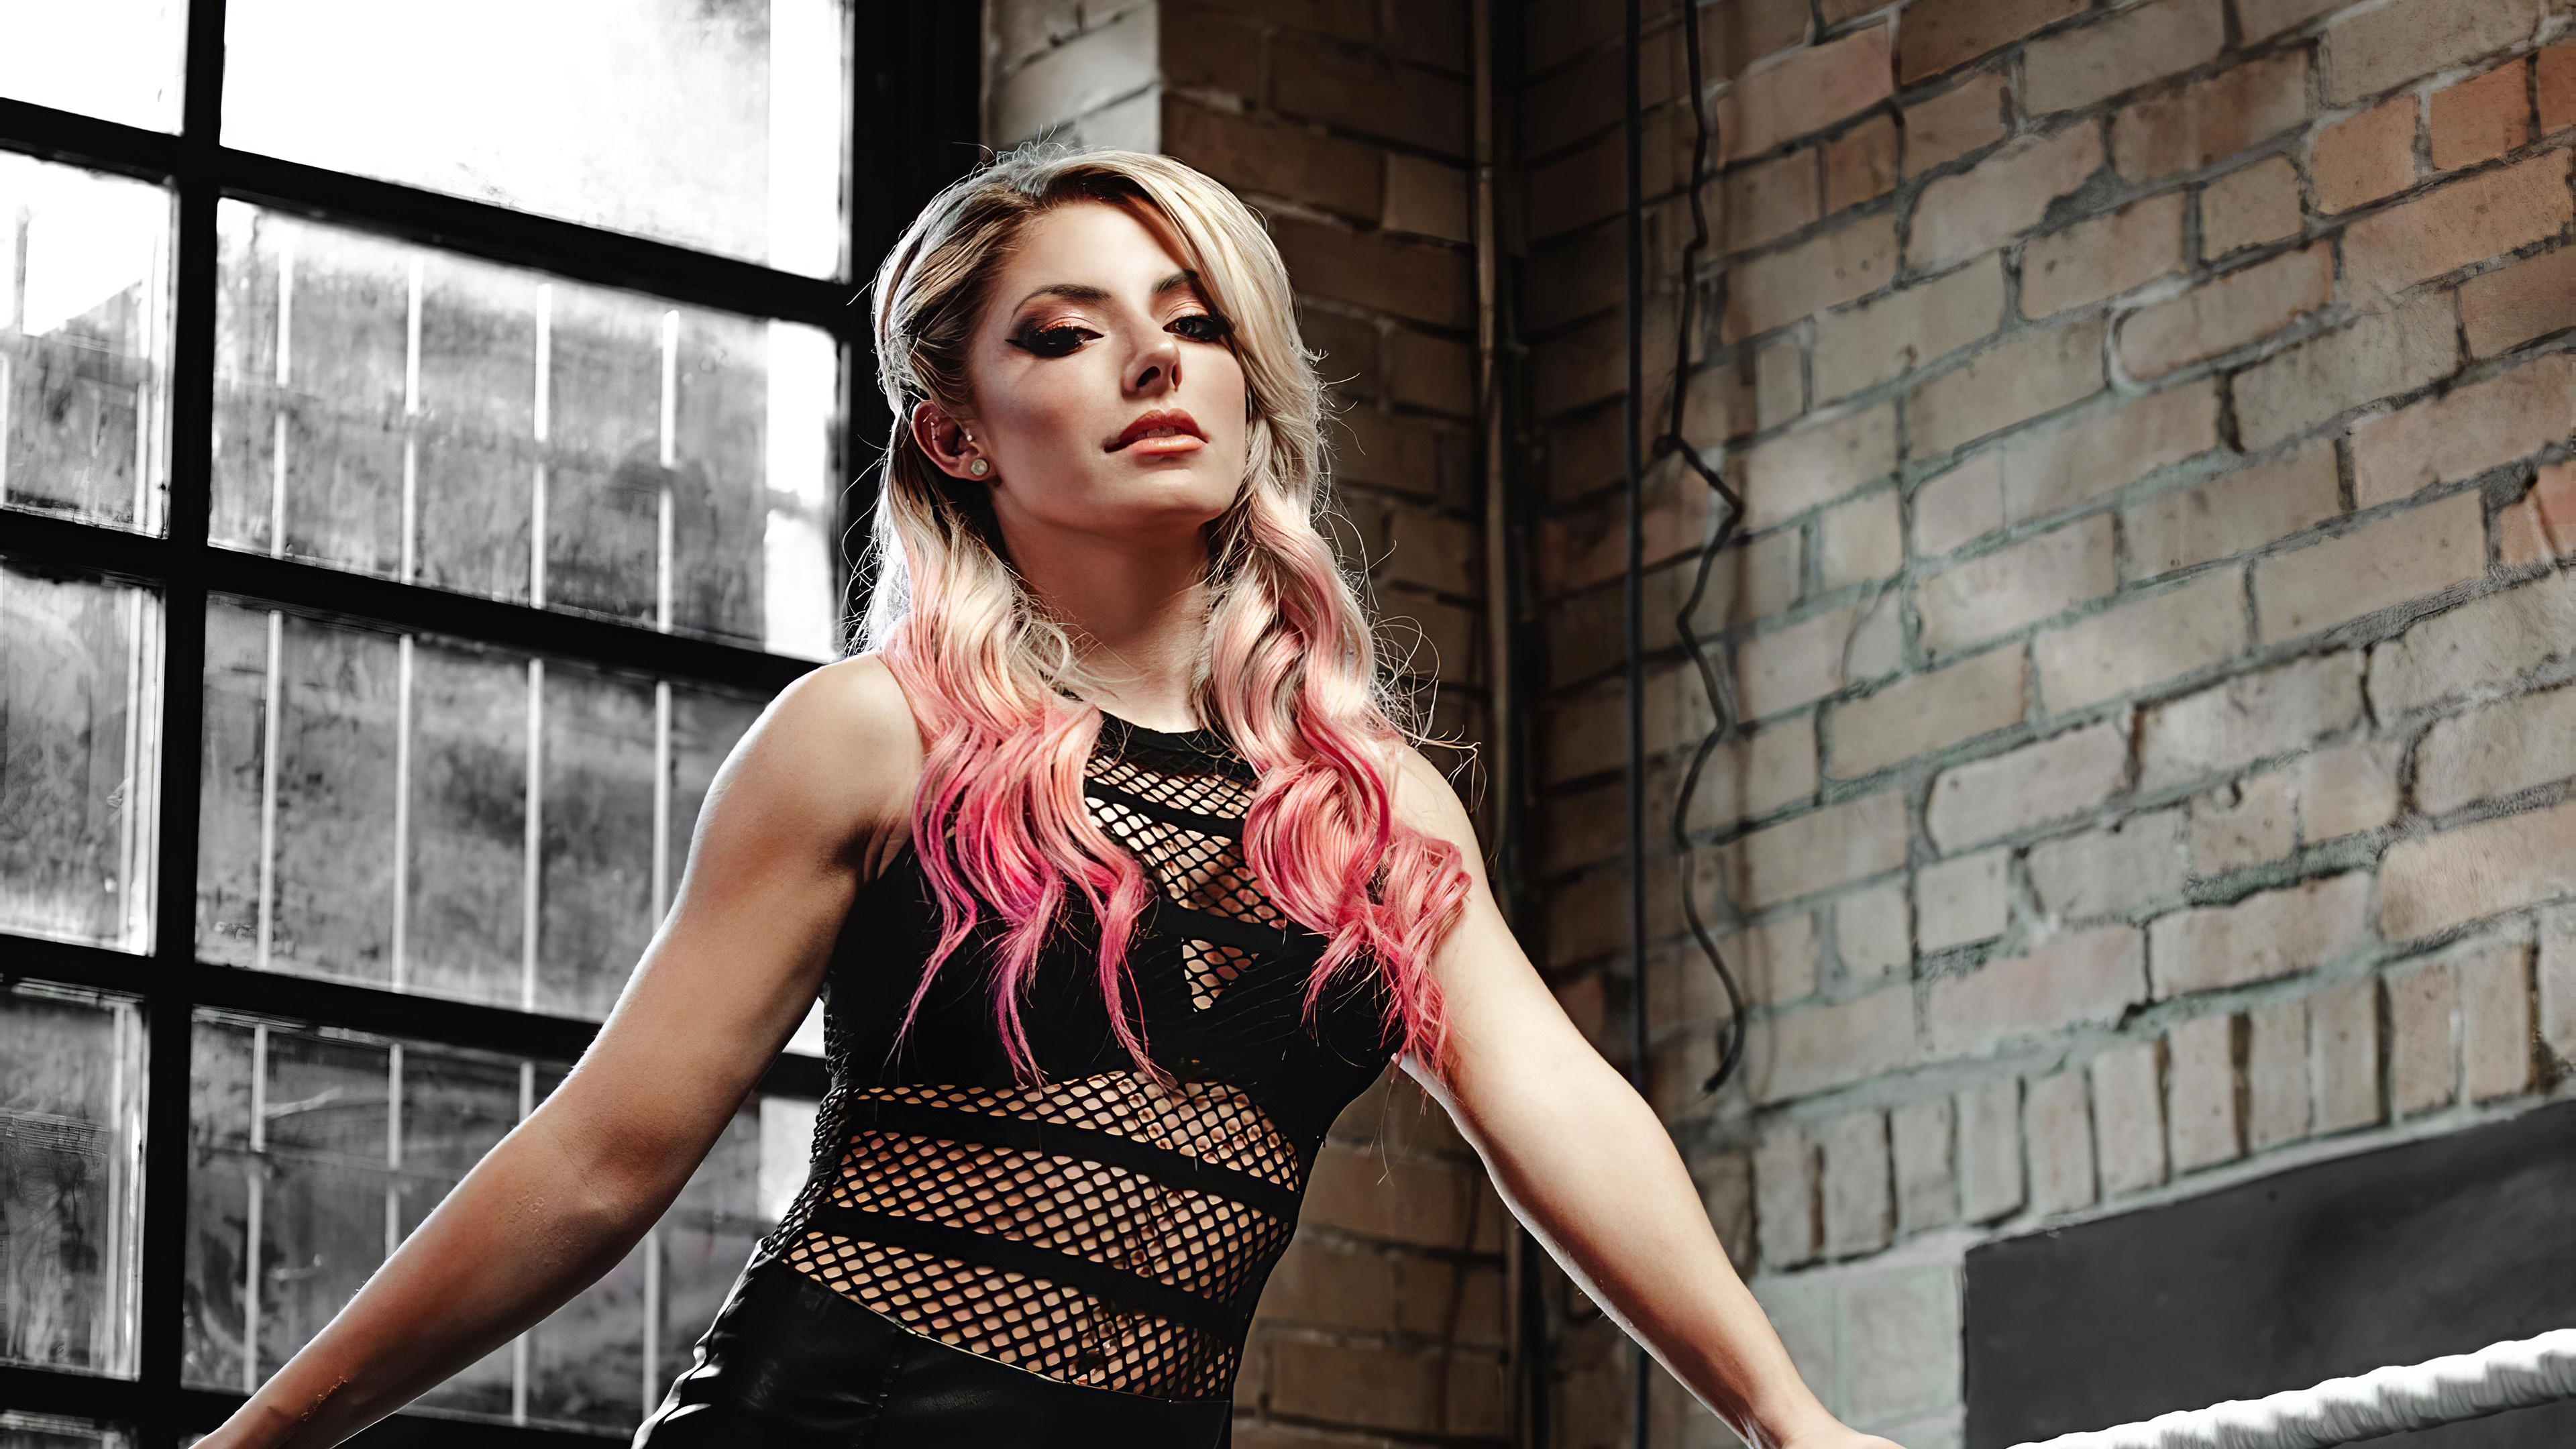 Alexa Bliss Wallpaper, what do you think? : r/WWE